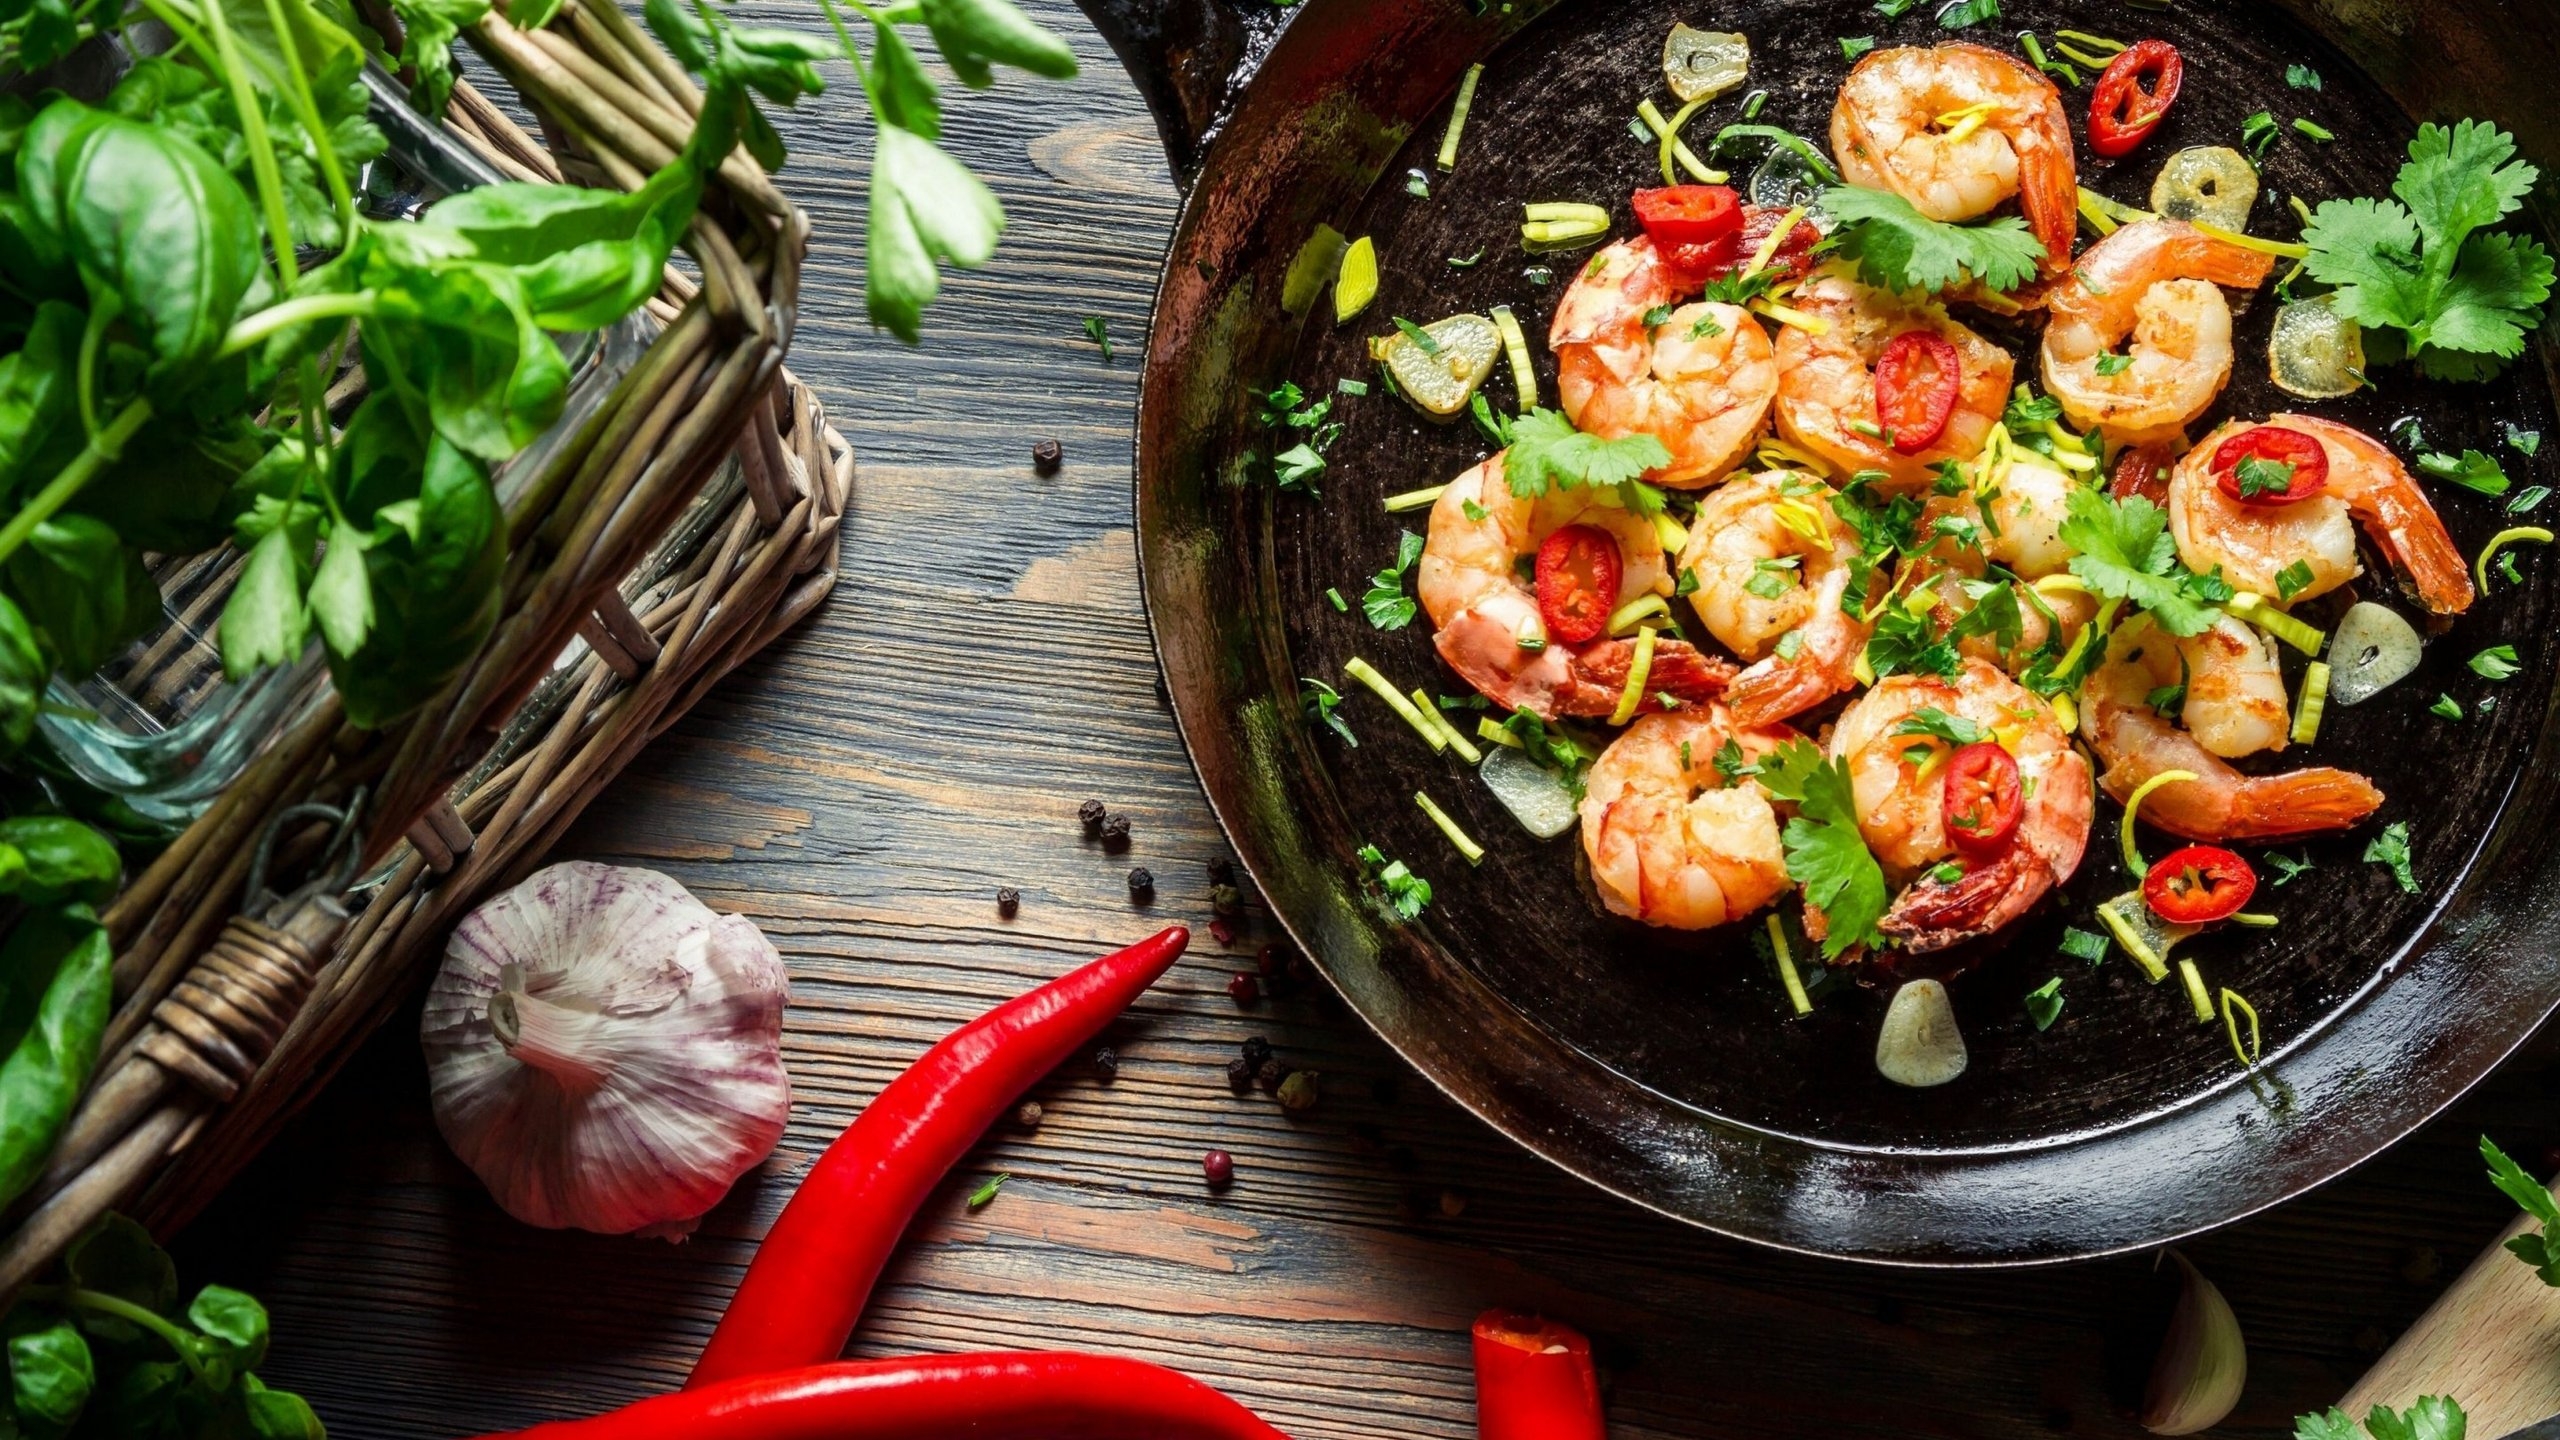 Shrimp with Pepper Chili Garlic Herbs for 2560x1440 HDTV resolution